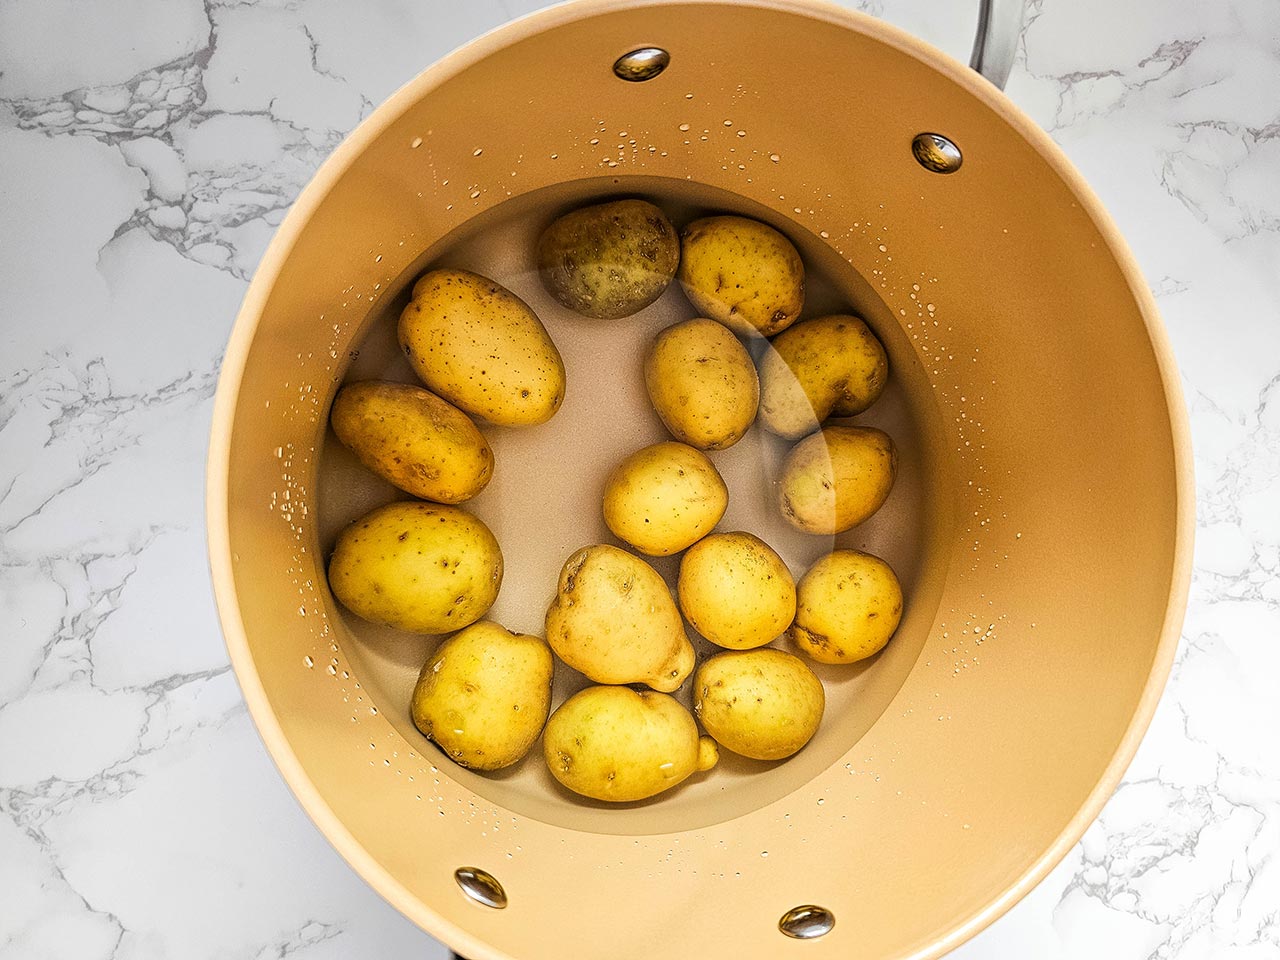 Potatoes in a pot of water.